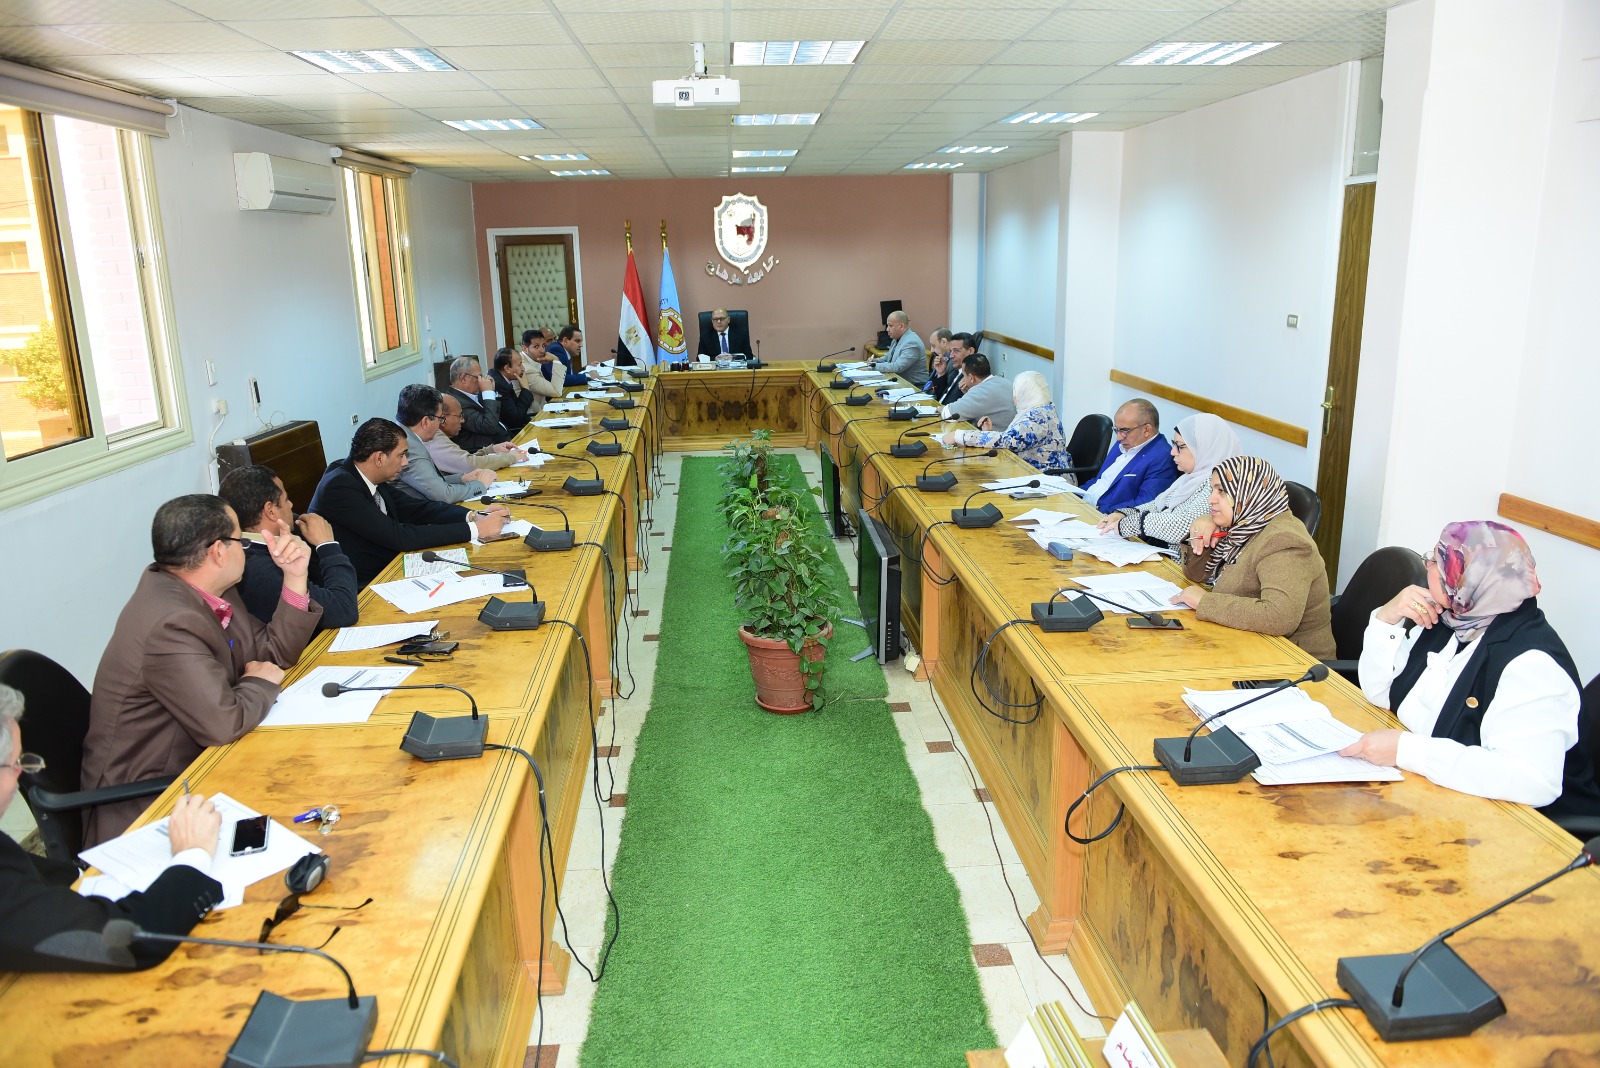 The Periodic meeting of the Council for Graduate Studies and Research Affairs was held, headed by Dr. Hassan Al-Noamani, President of Sohag University